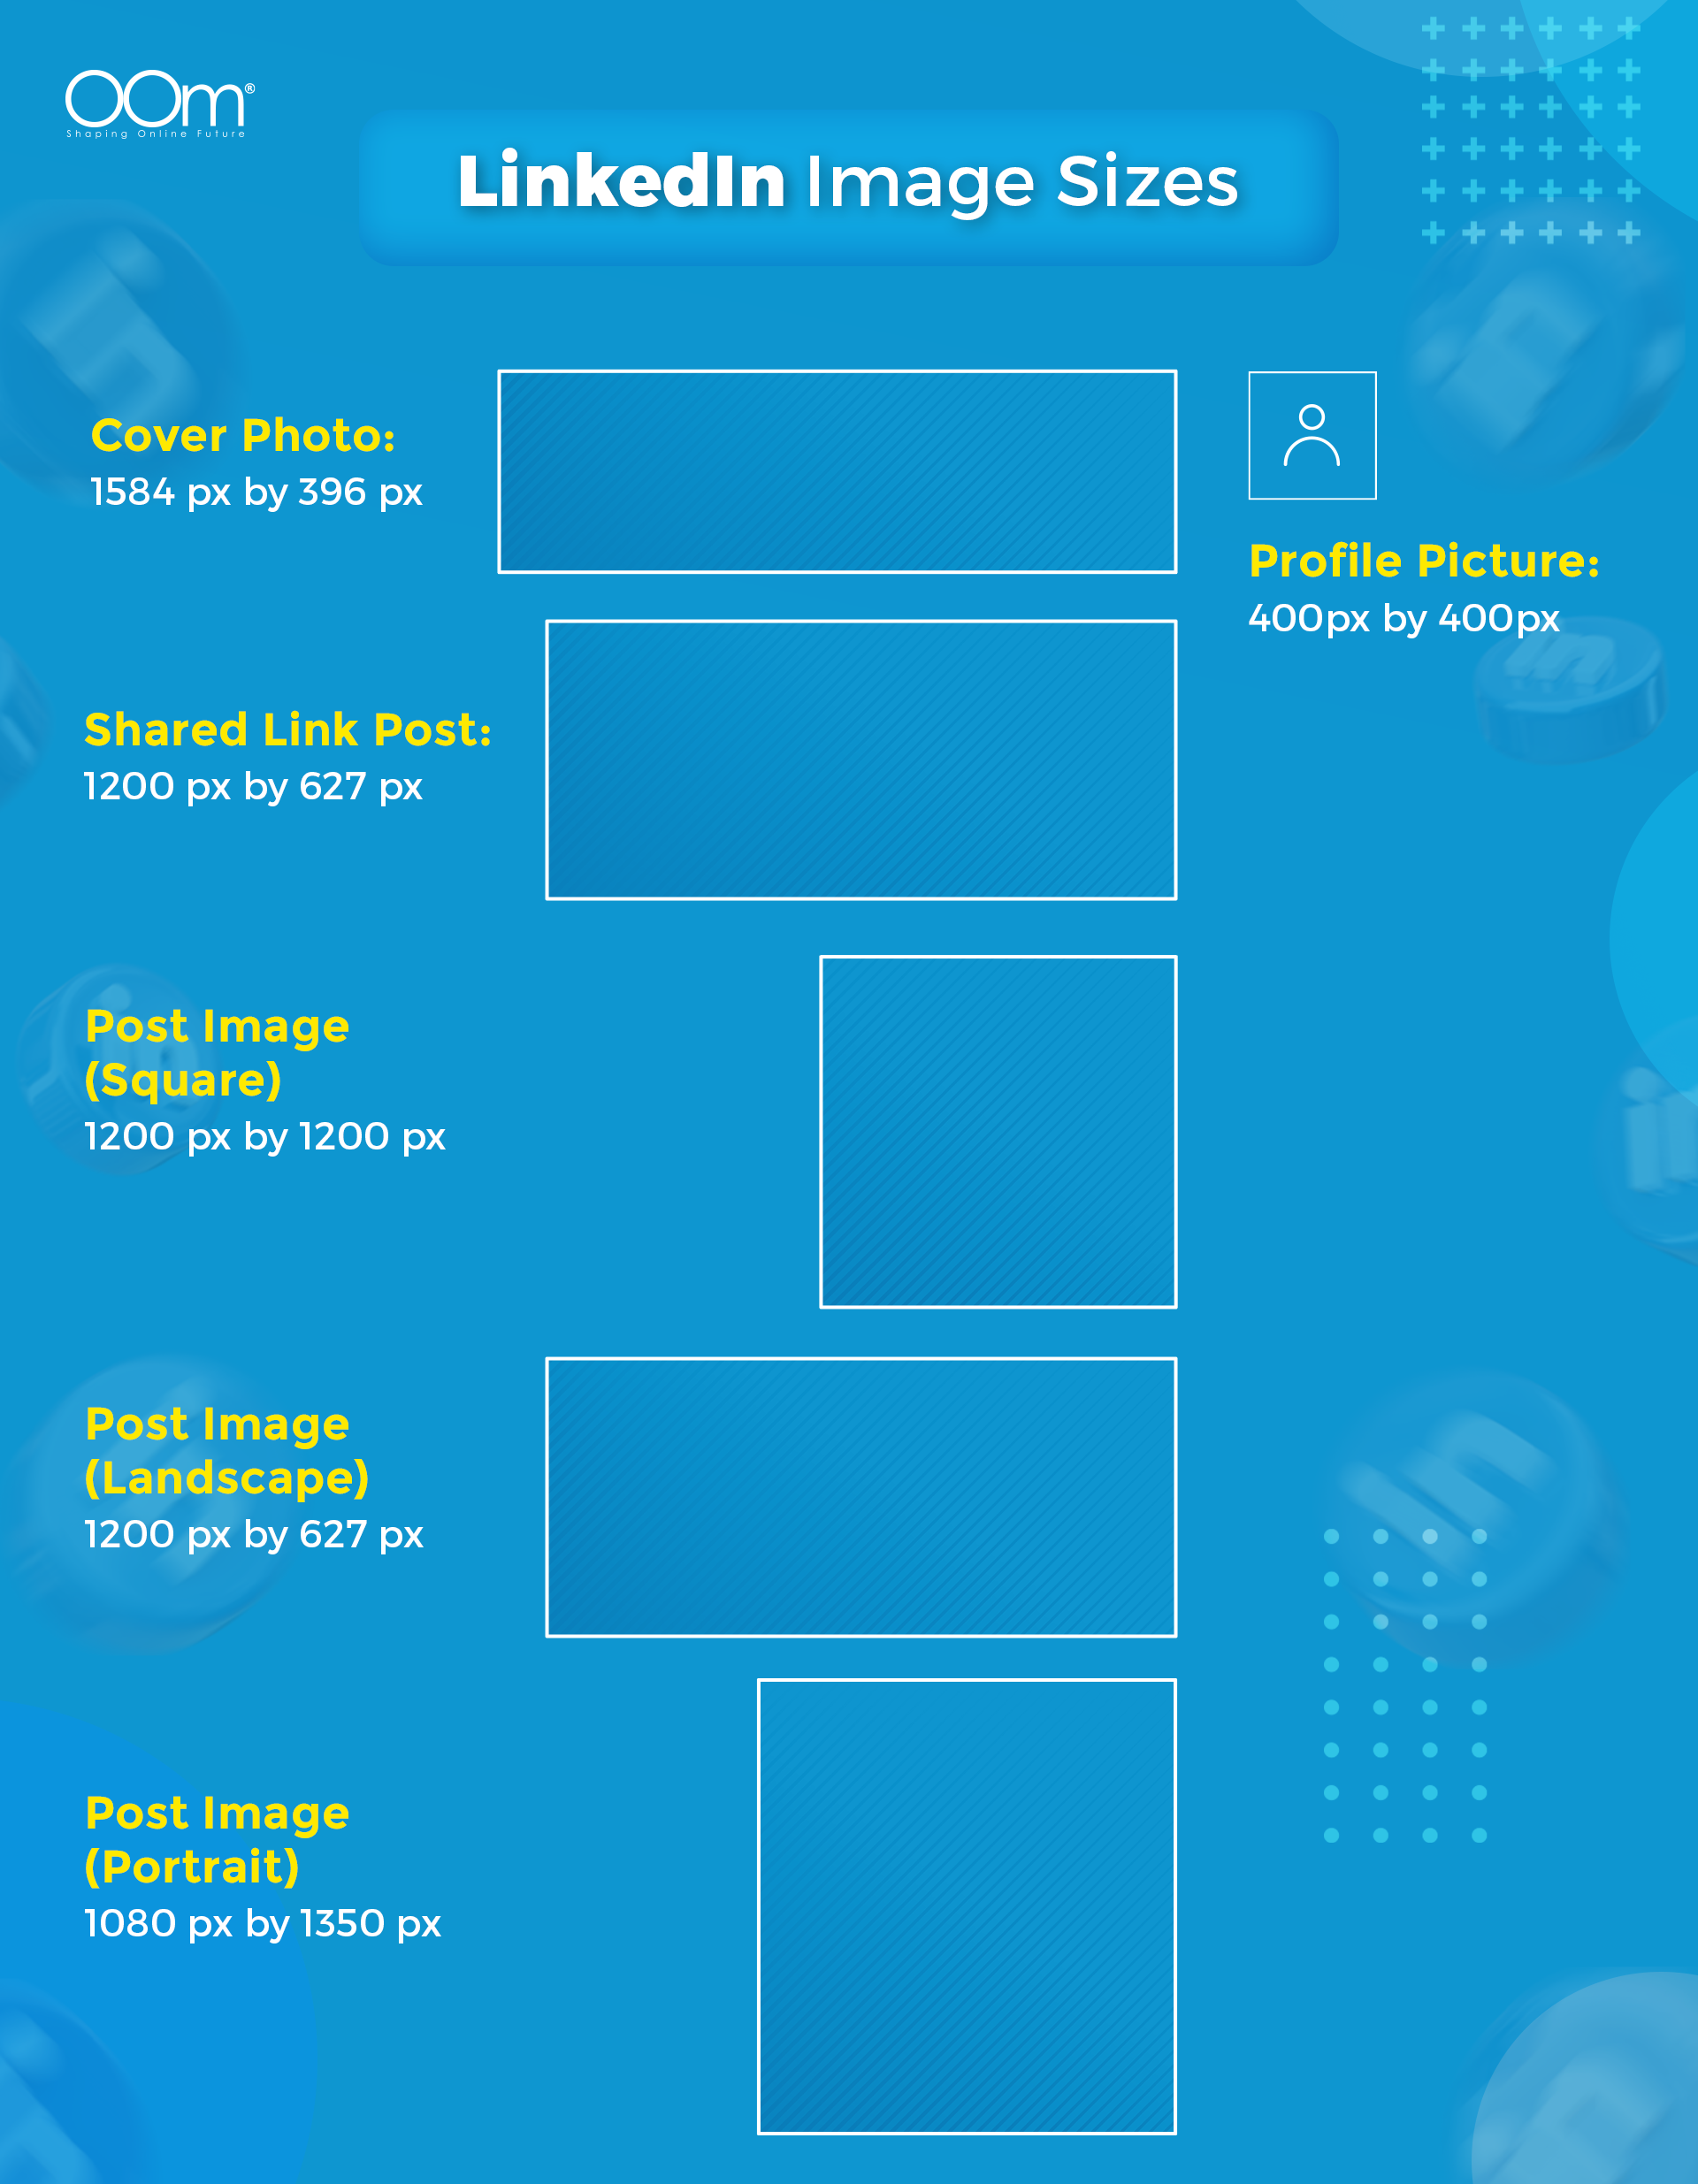 Guide to LinkedIn Image Sizes